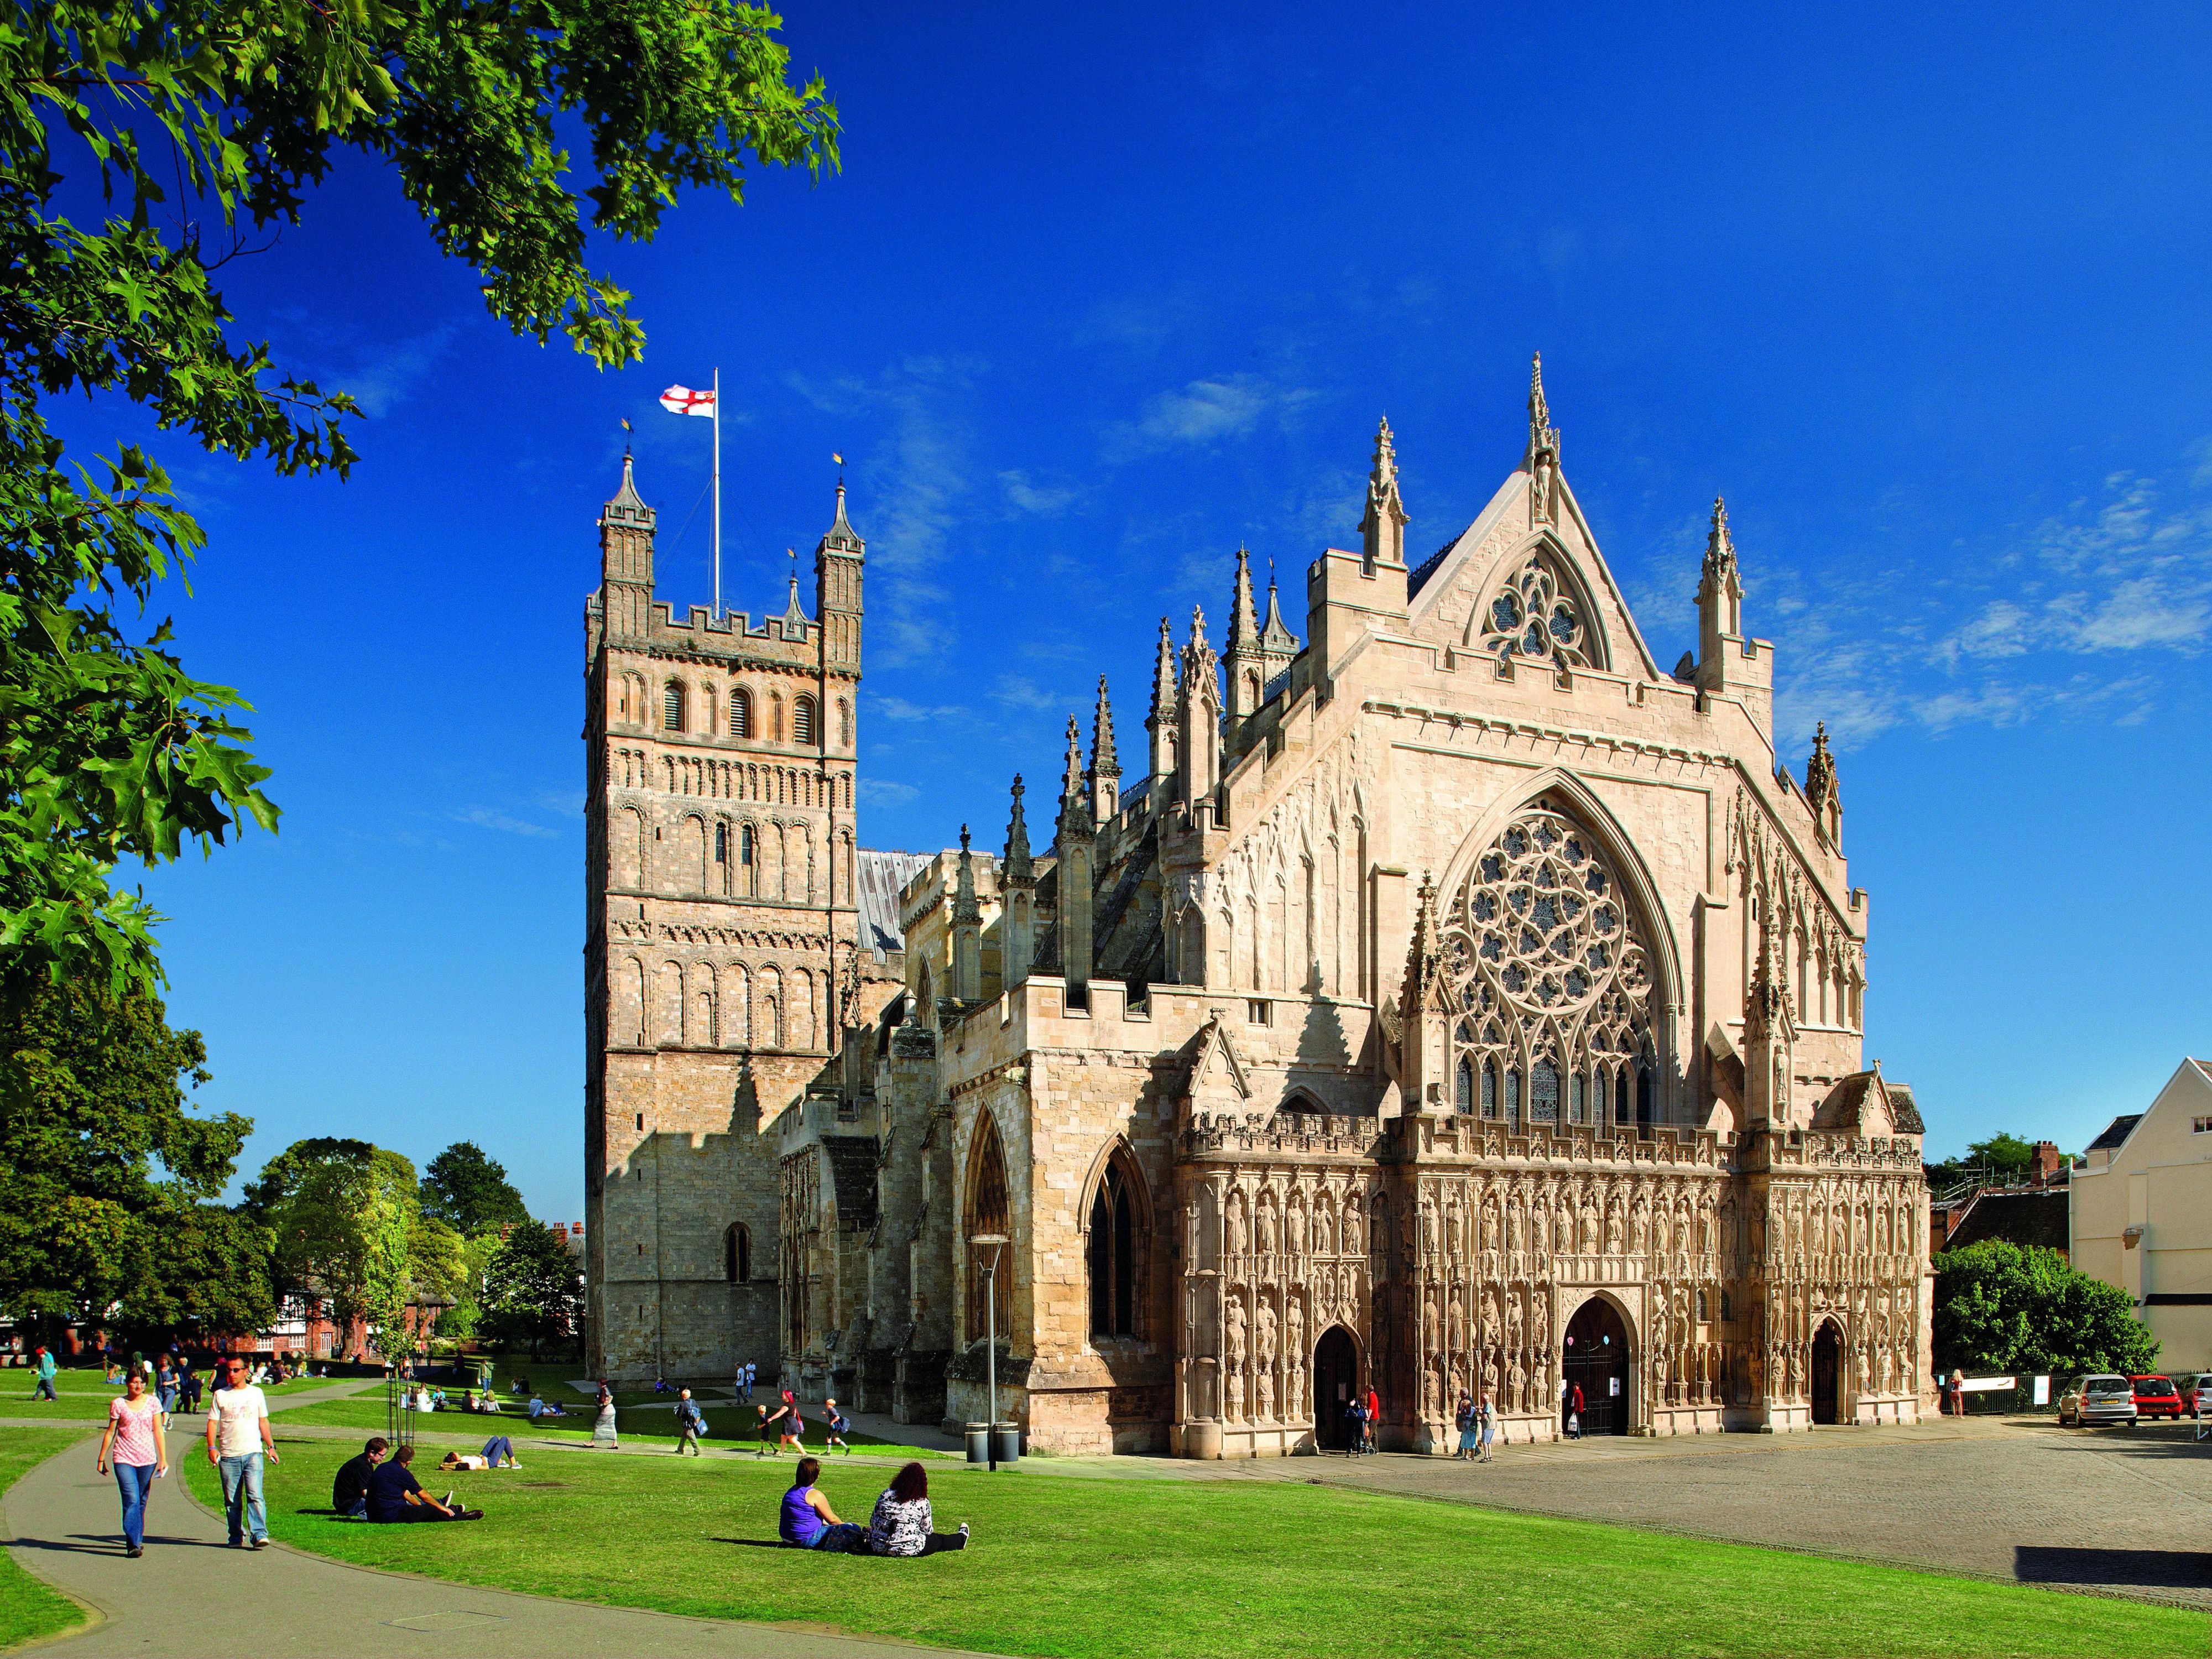 Exeter Cathedral is a 10-minute walk from our hotel